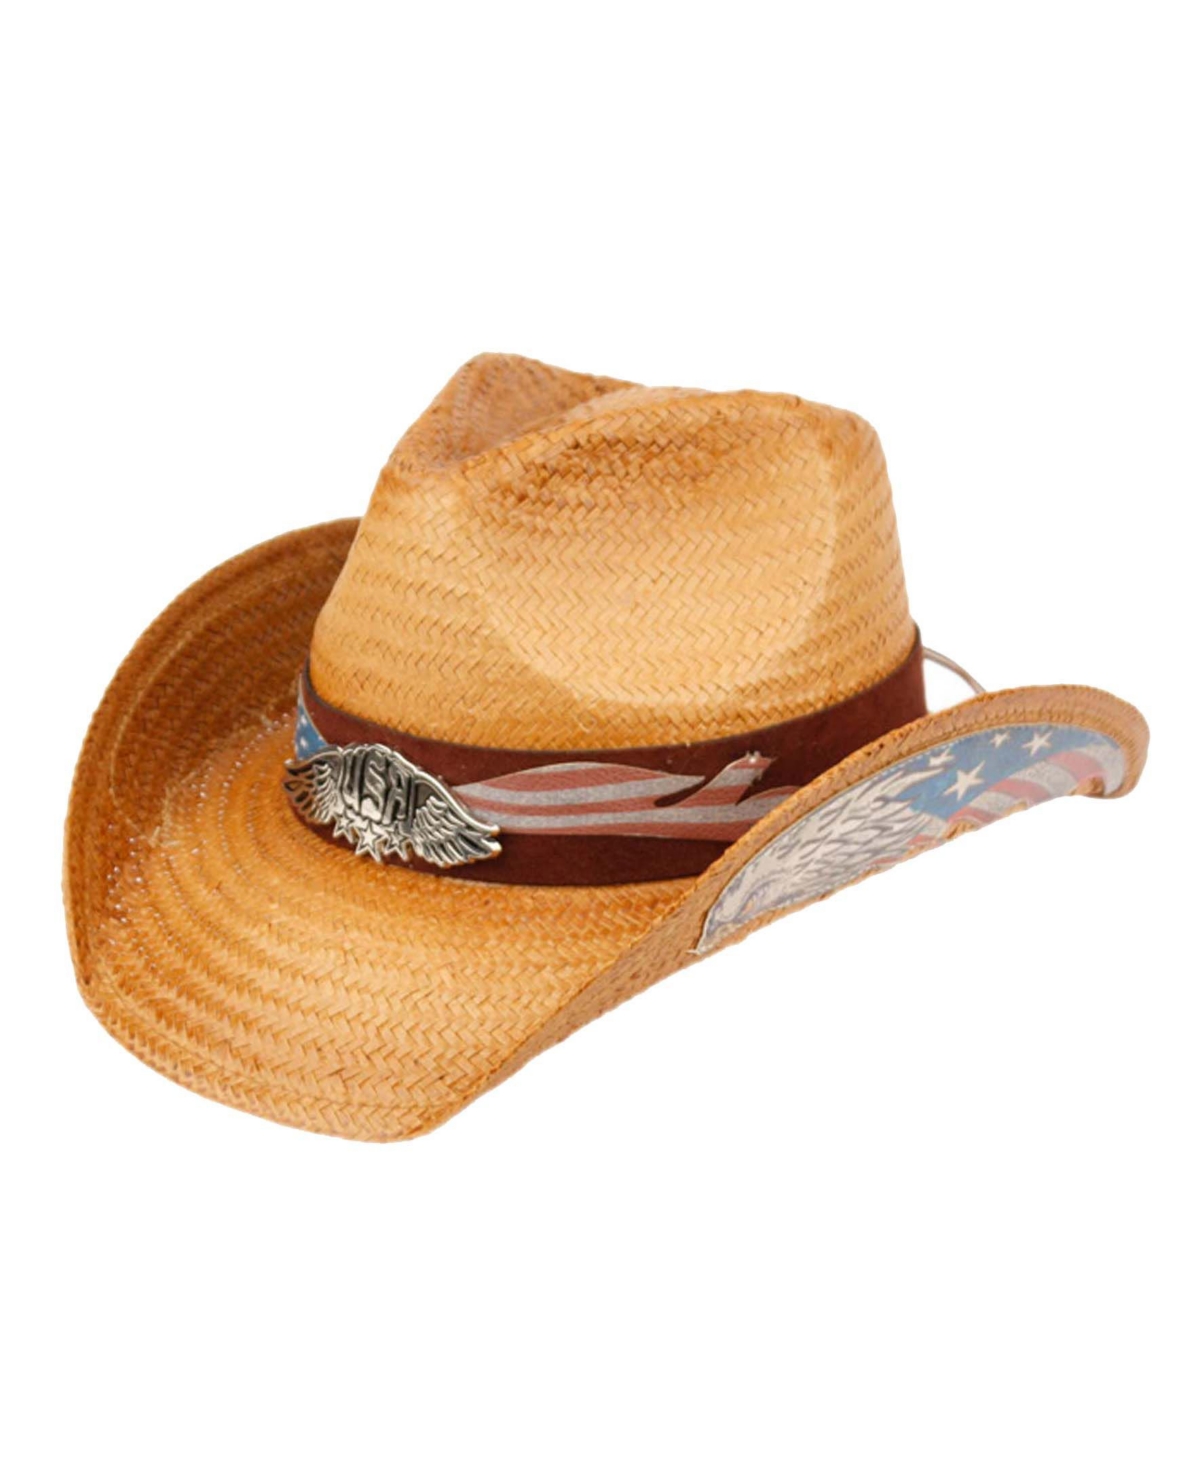 Angela & William Cowboy Hat with Eagle Badge and American Flag Band - Natural